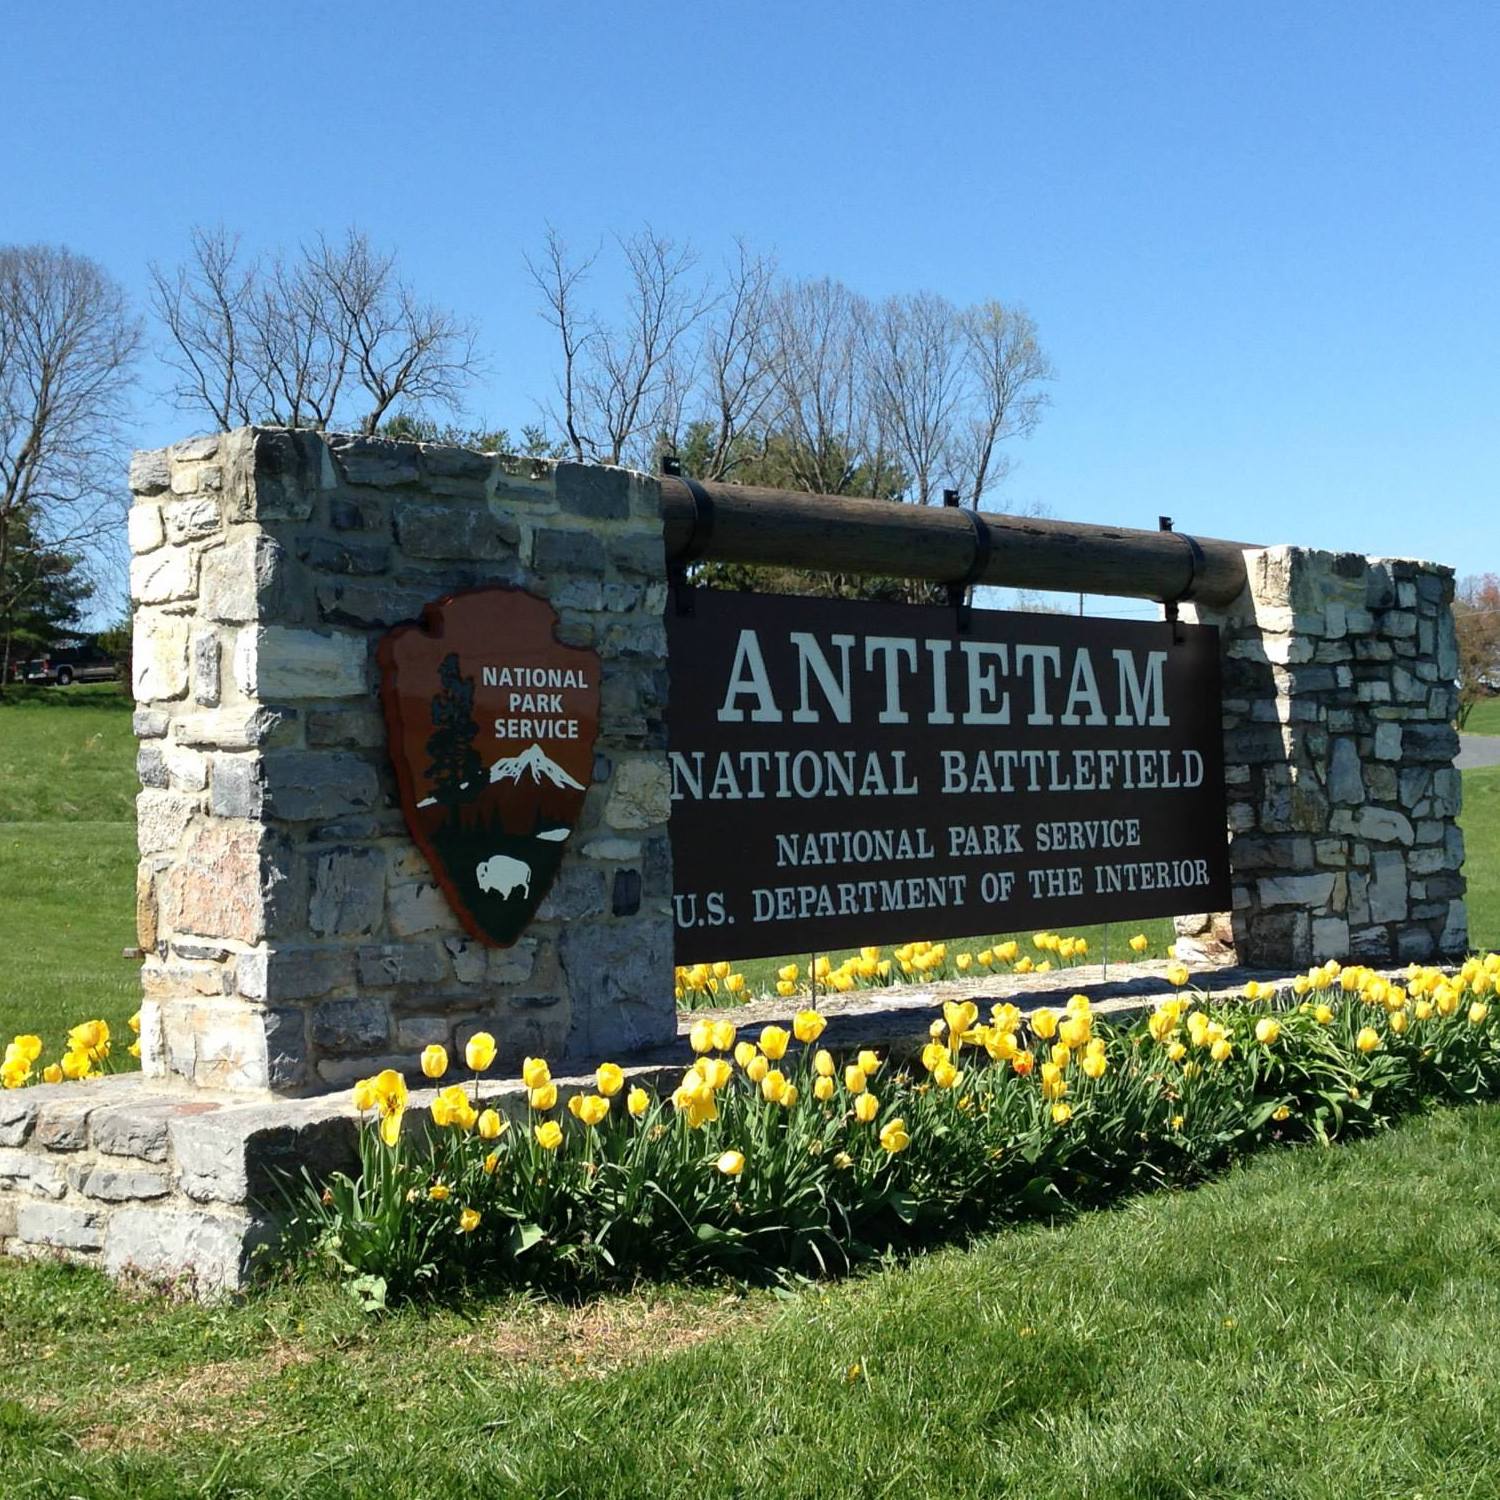 A carved, wooden sign mounted between stone pillars, with the words Antietam National Battlefield, National Park Service, US Department of the Interior. The National Park Service arrowhead plaque is mounted on one stone pillar. Yellow flowers grow below.